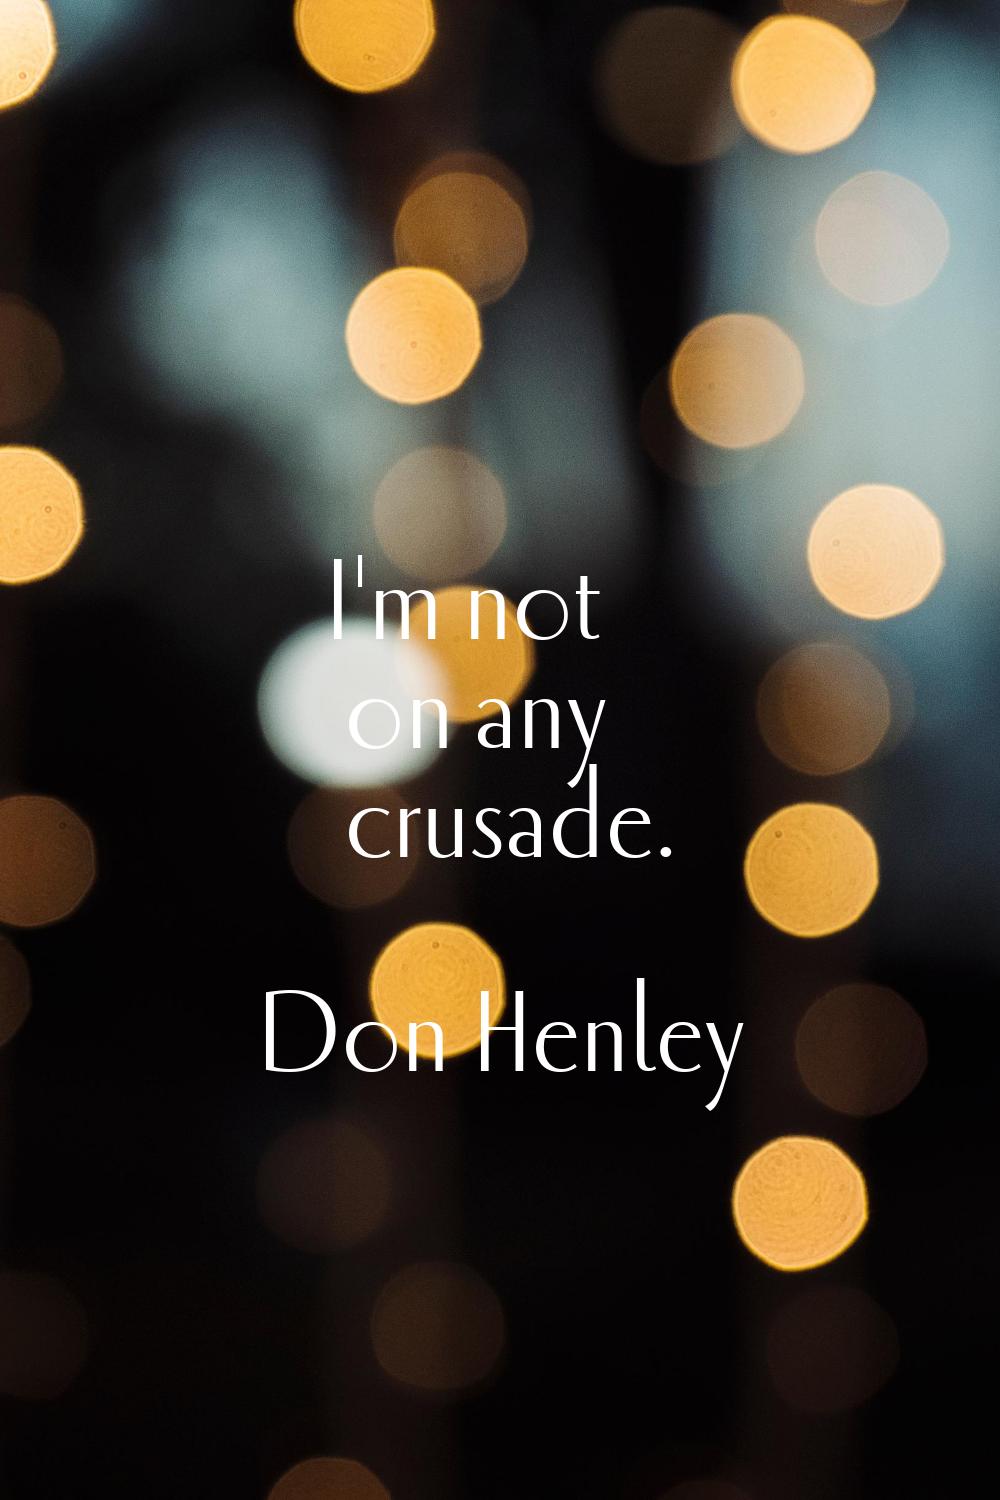 I'm not on any crusade.